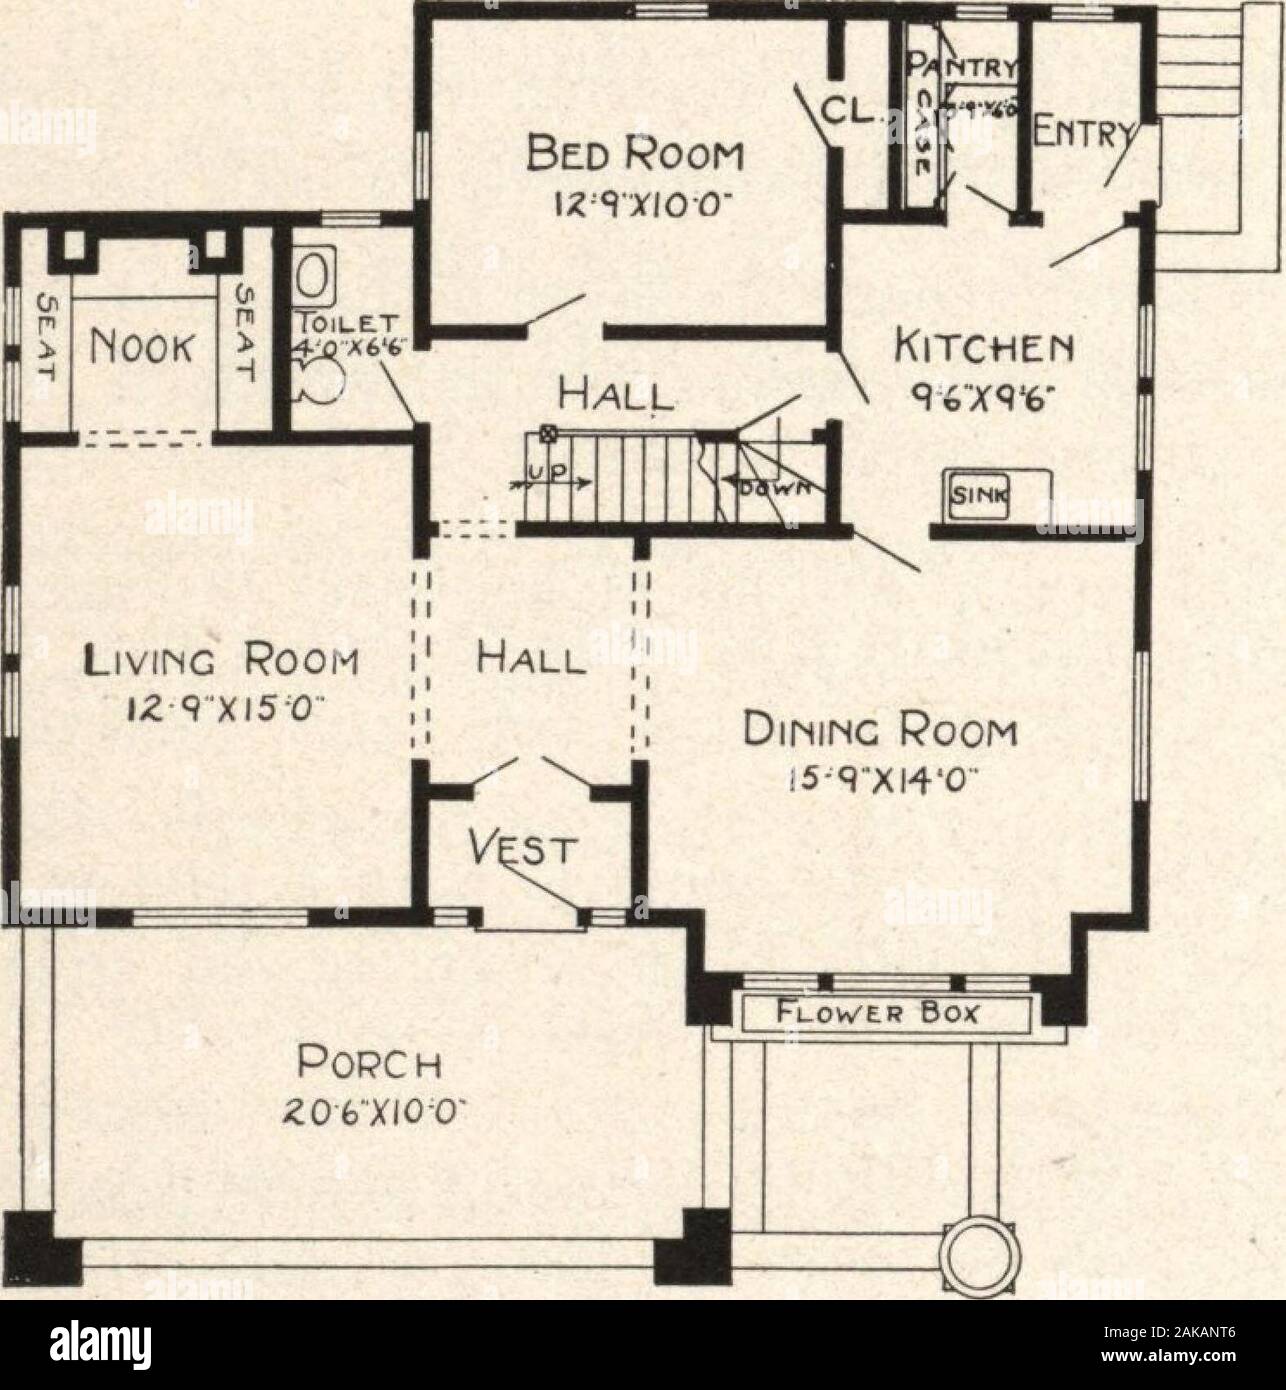 Cement houses and how to build them. . First Floor Plan Second Floor Plan Bine prints consist of basement plan; roof plan;first and second floor plans; front, rear, two side eleva-tions; wall